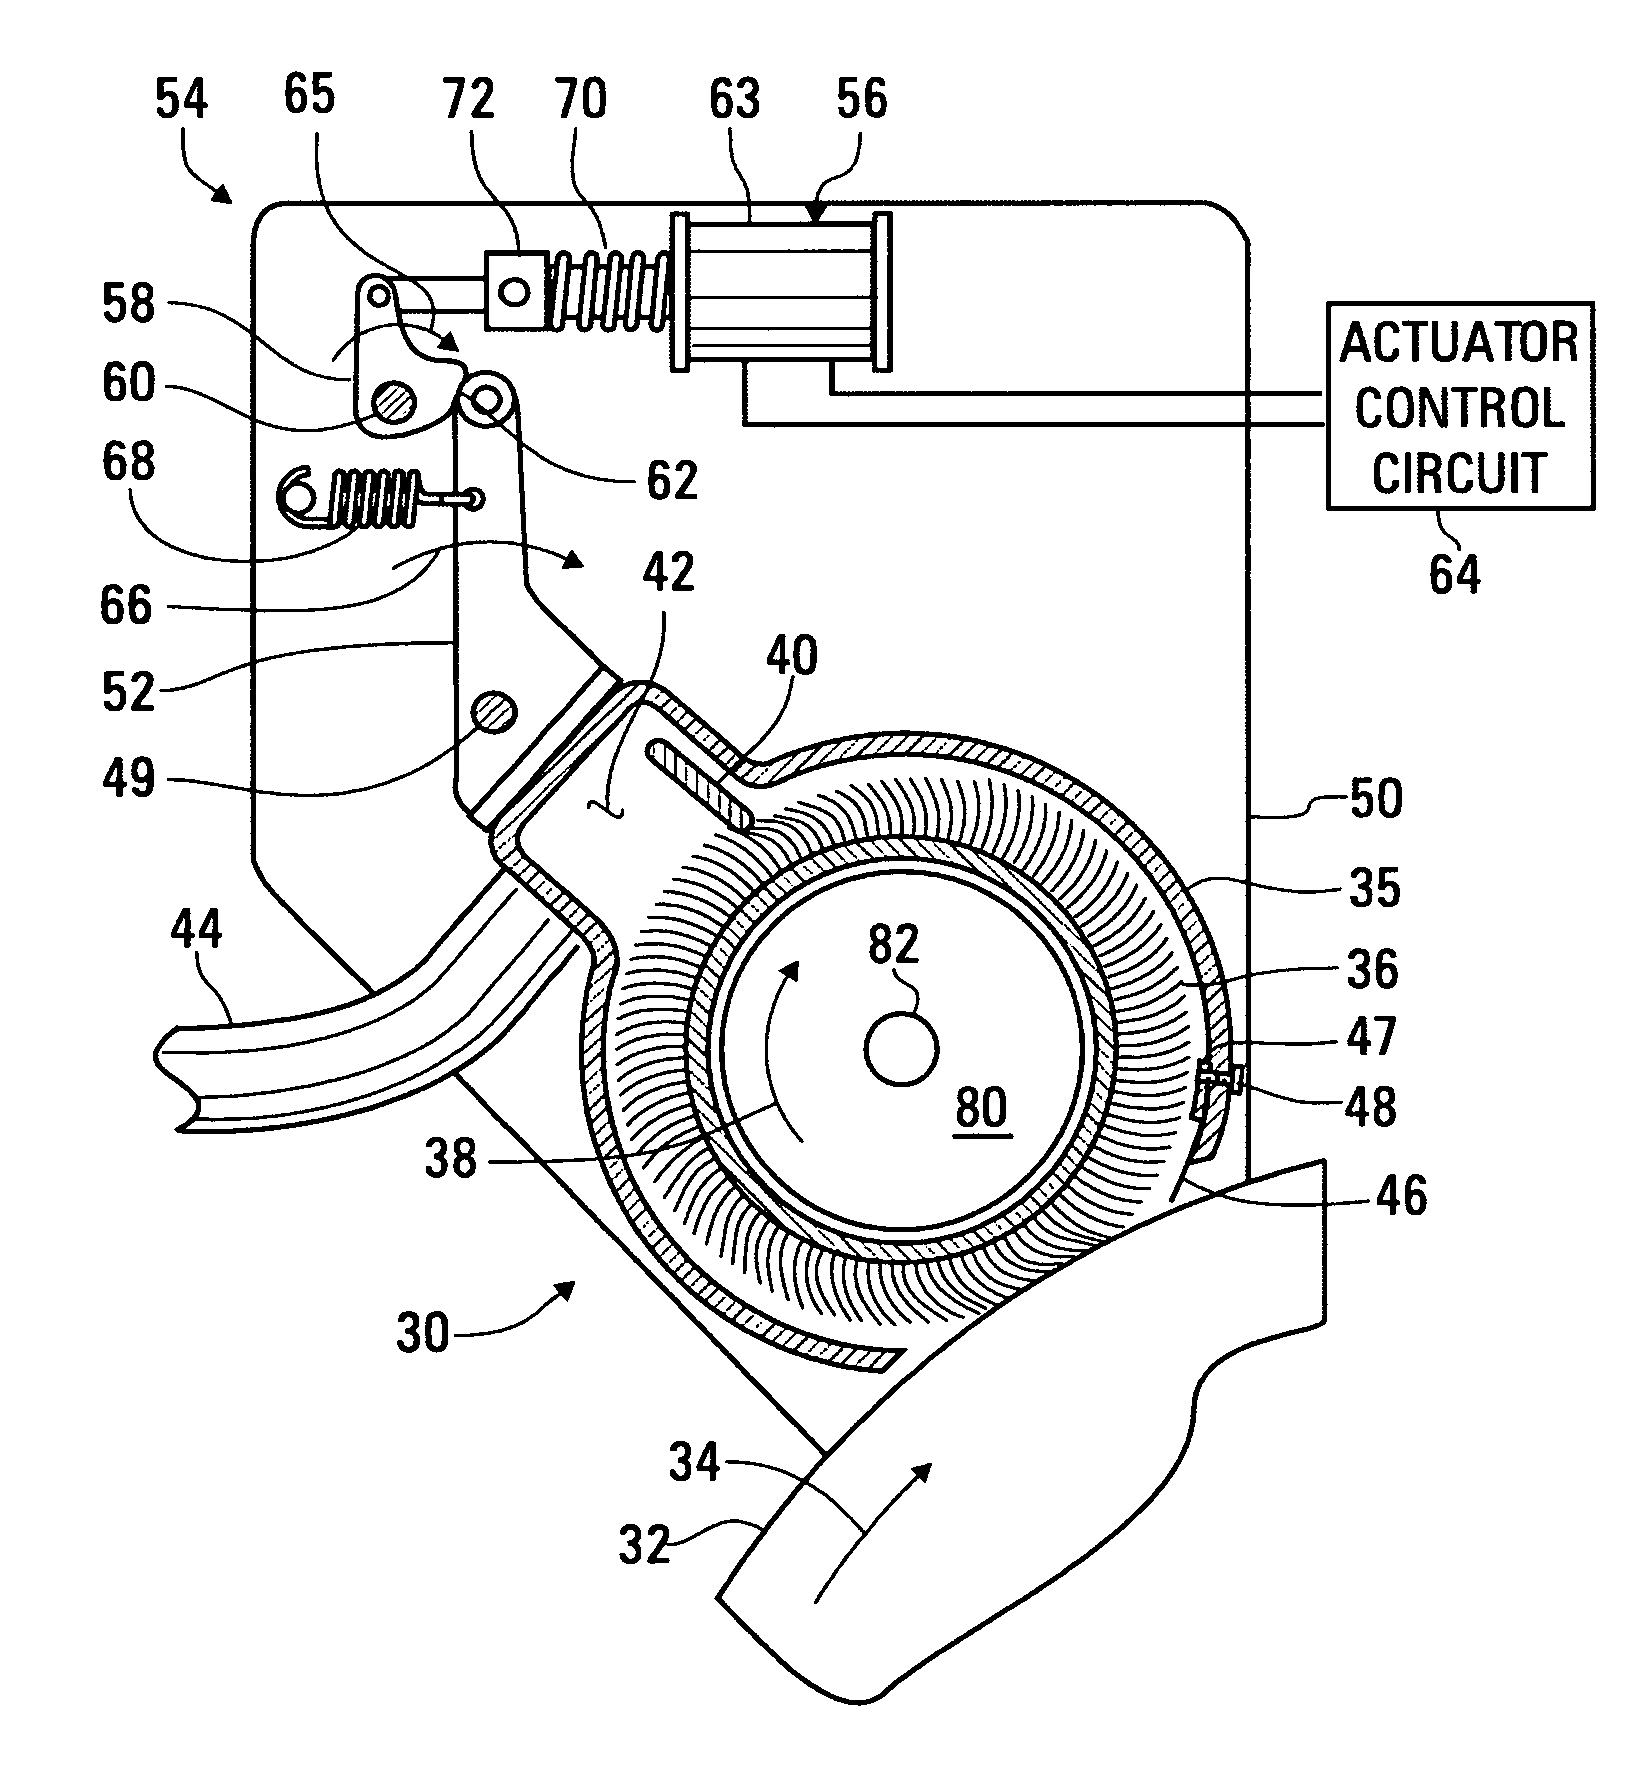 Apparatus and method for cleaning residual toner with a scraper blade periodically held in contact with a toner transfer surface